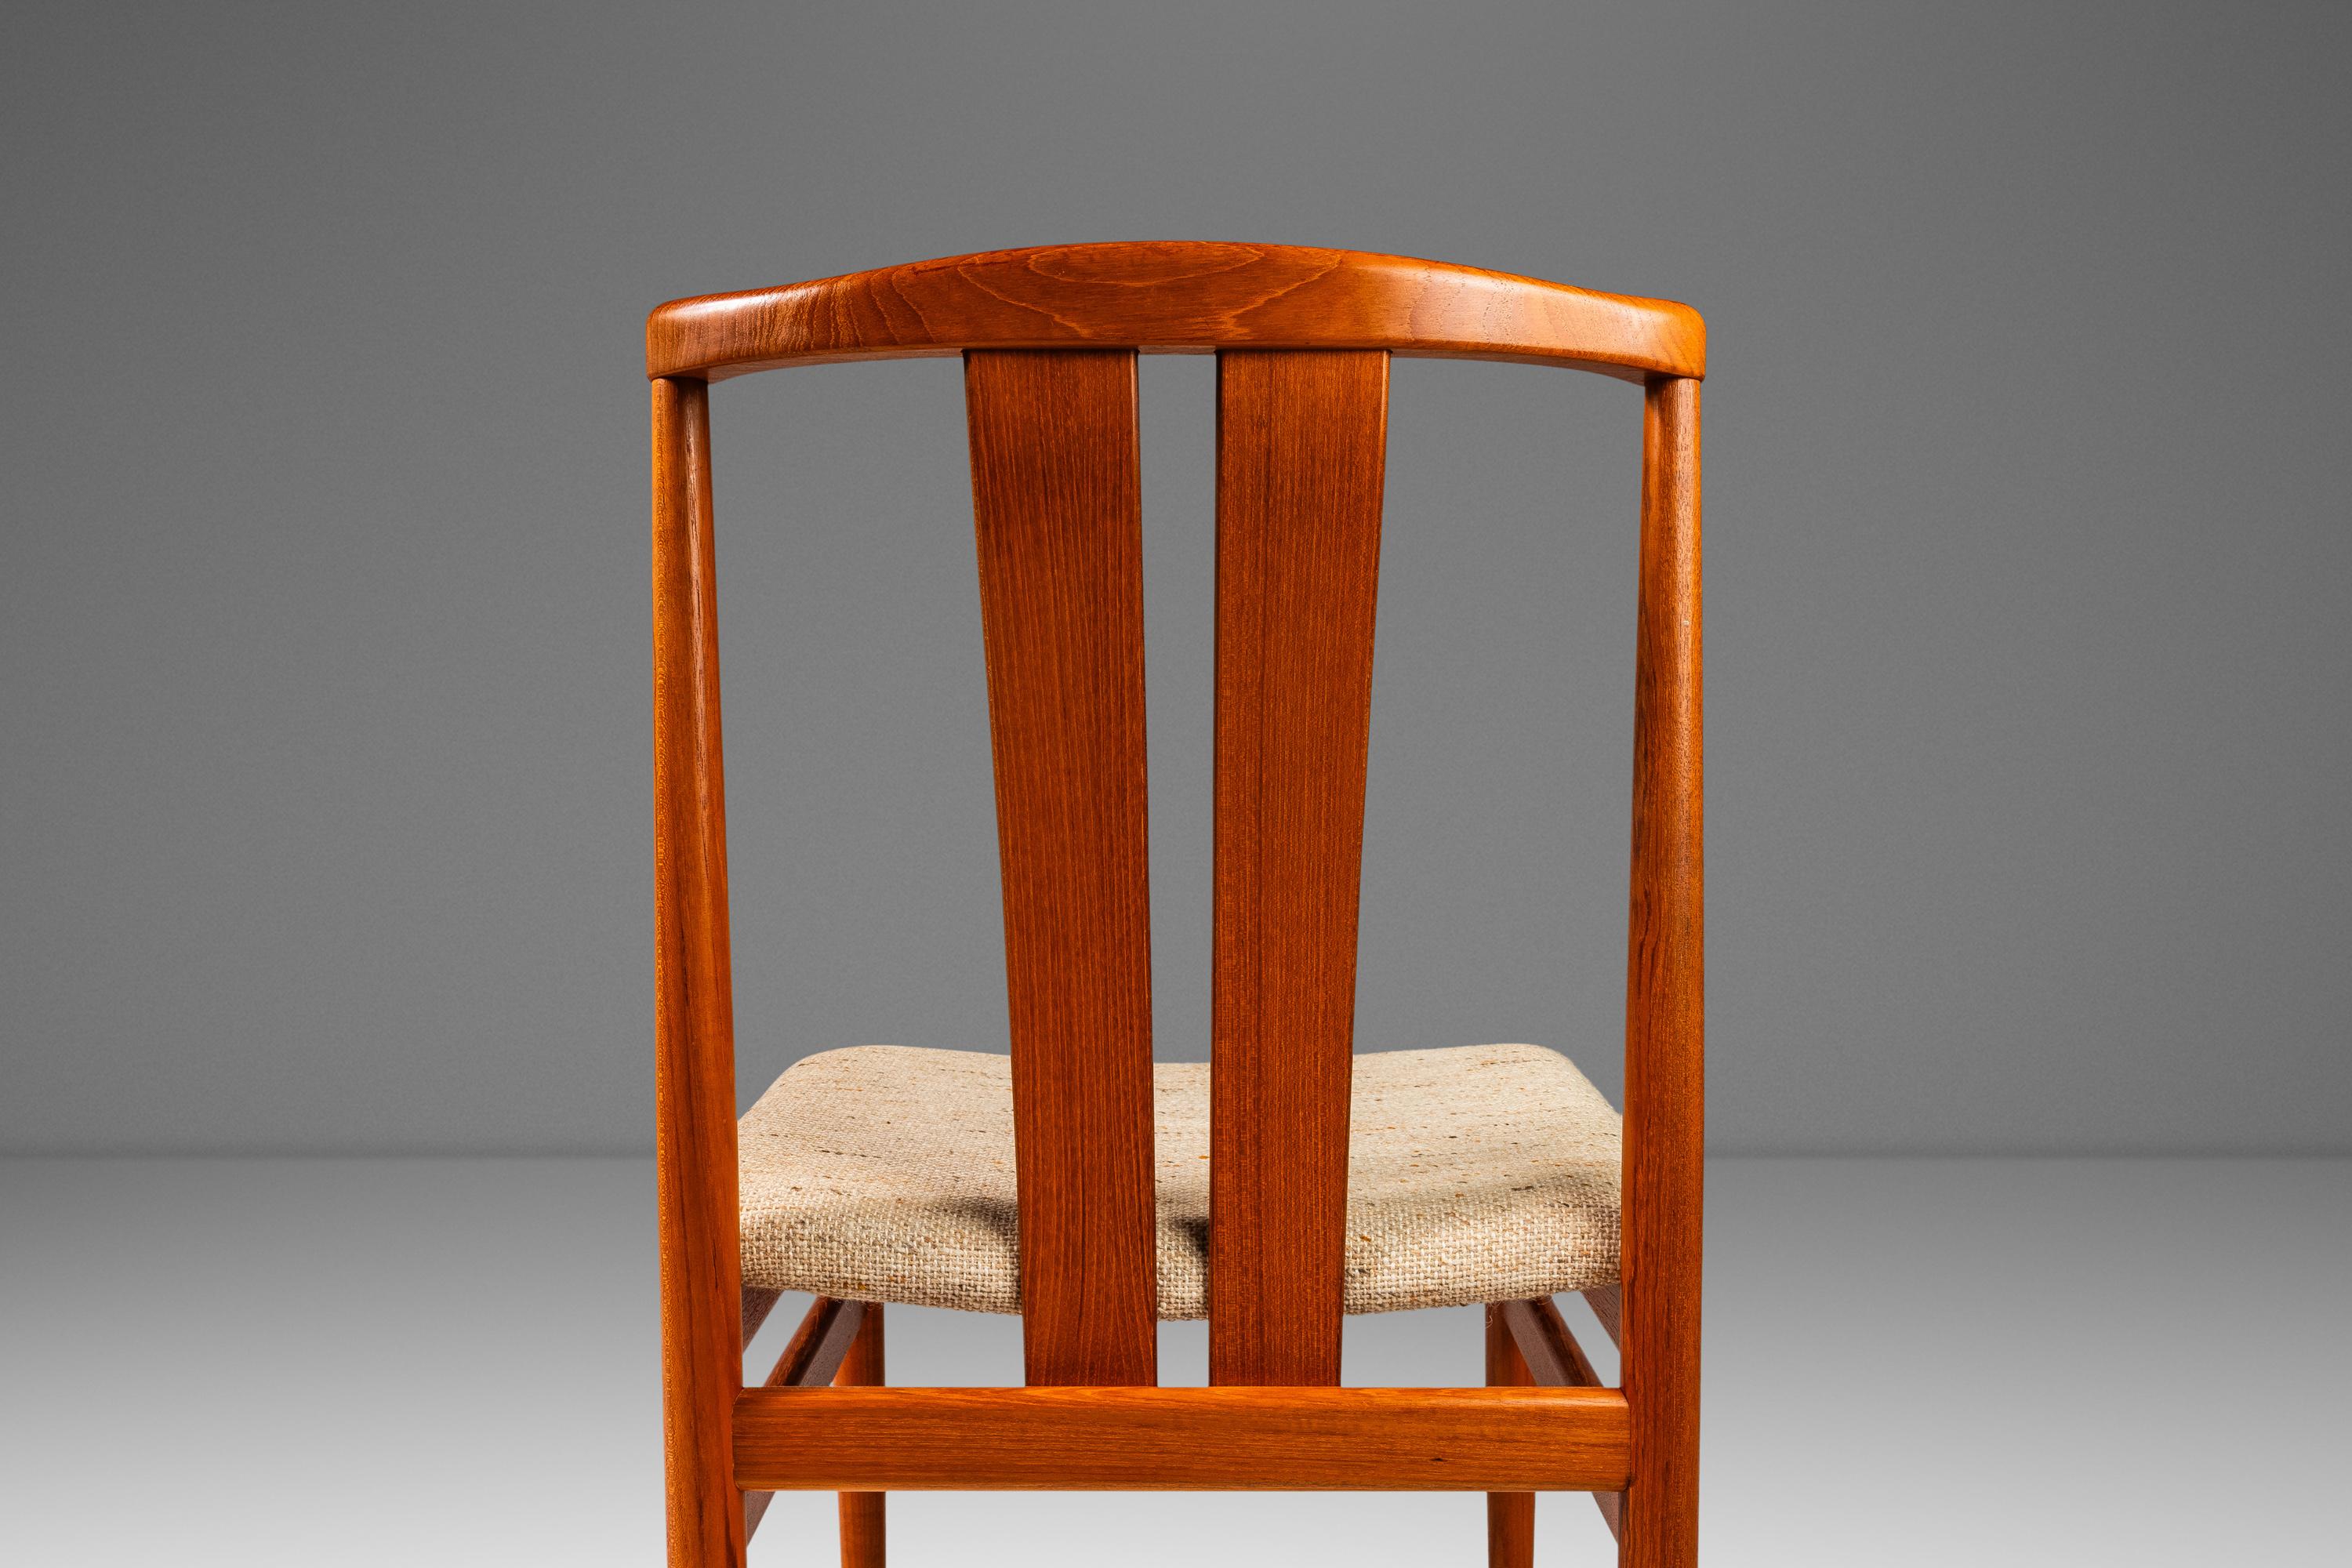 Set of 4 Dining Chairs, Teak & Oatmeal Knit Fabric by Vamdrup Stolefabrik, 1960s For Sale 8